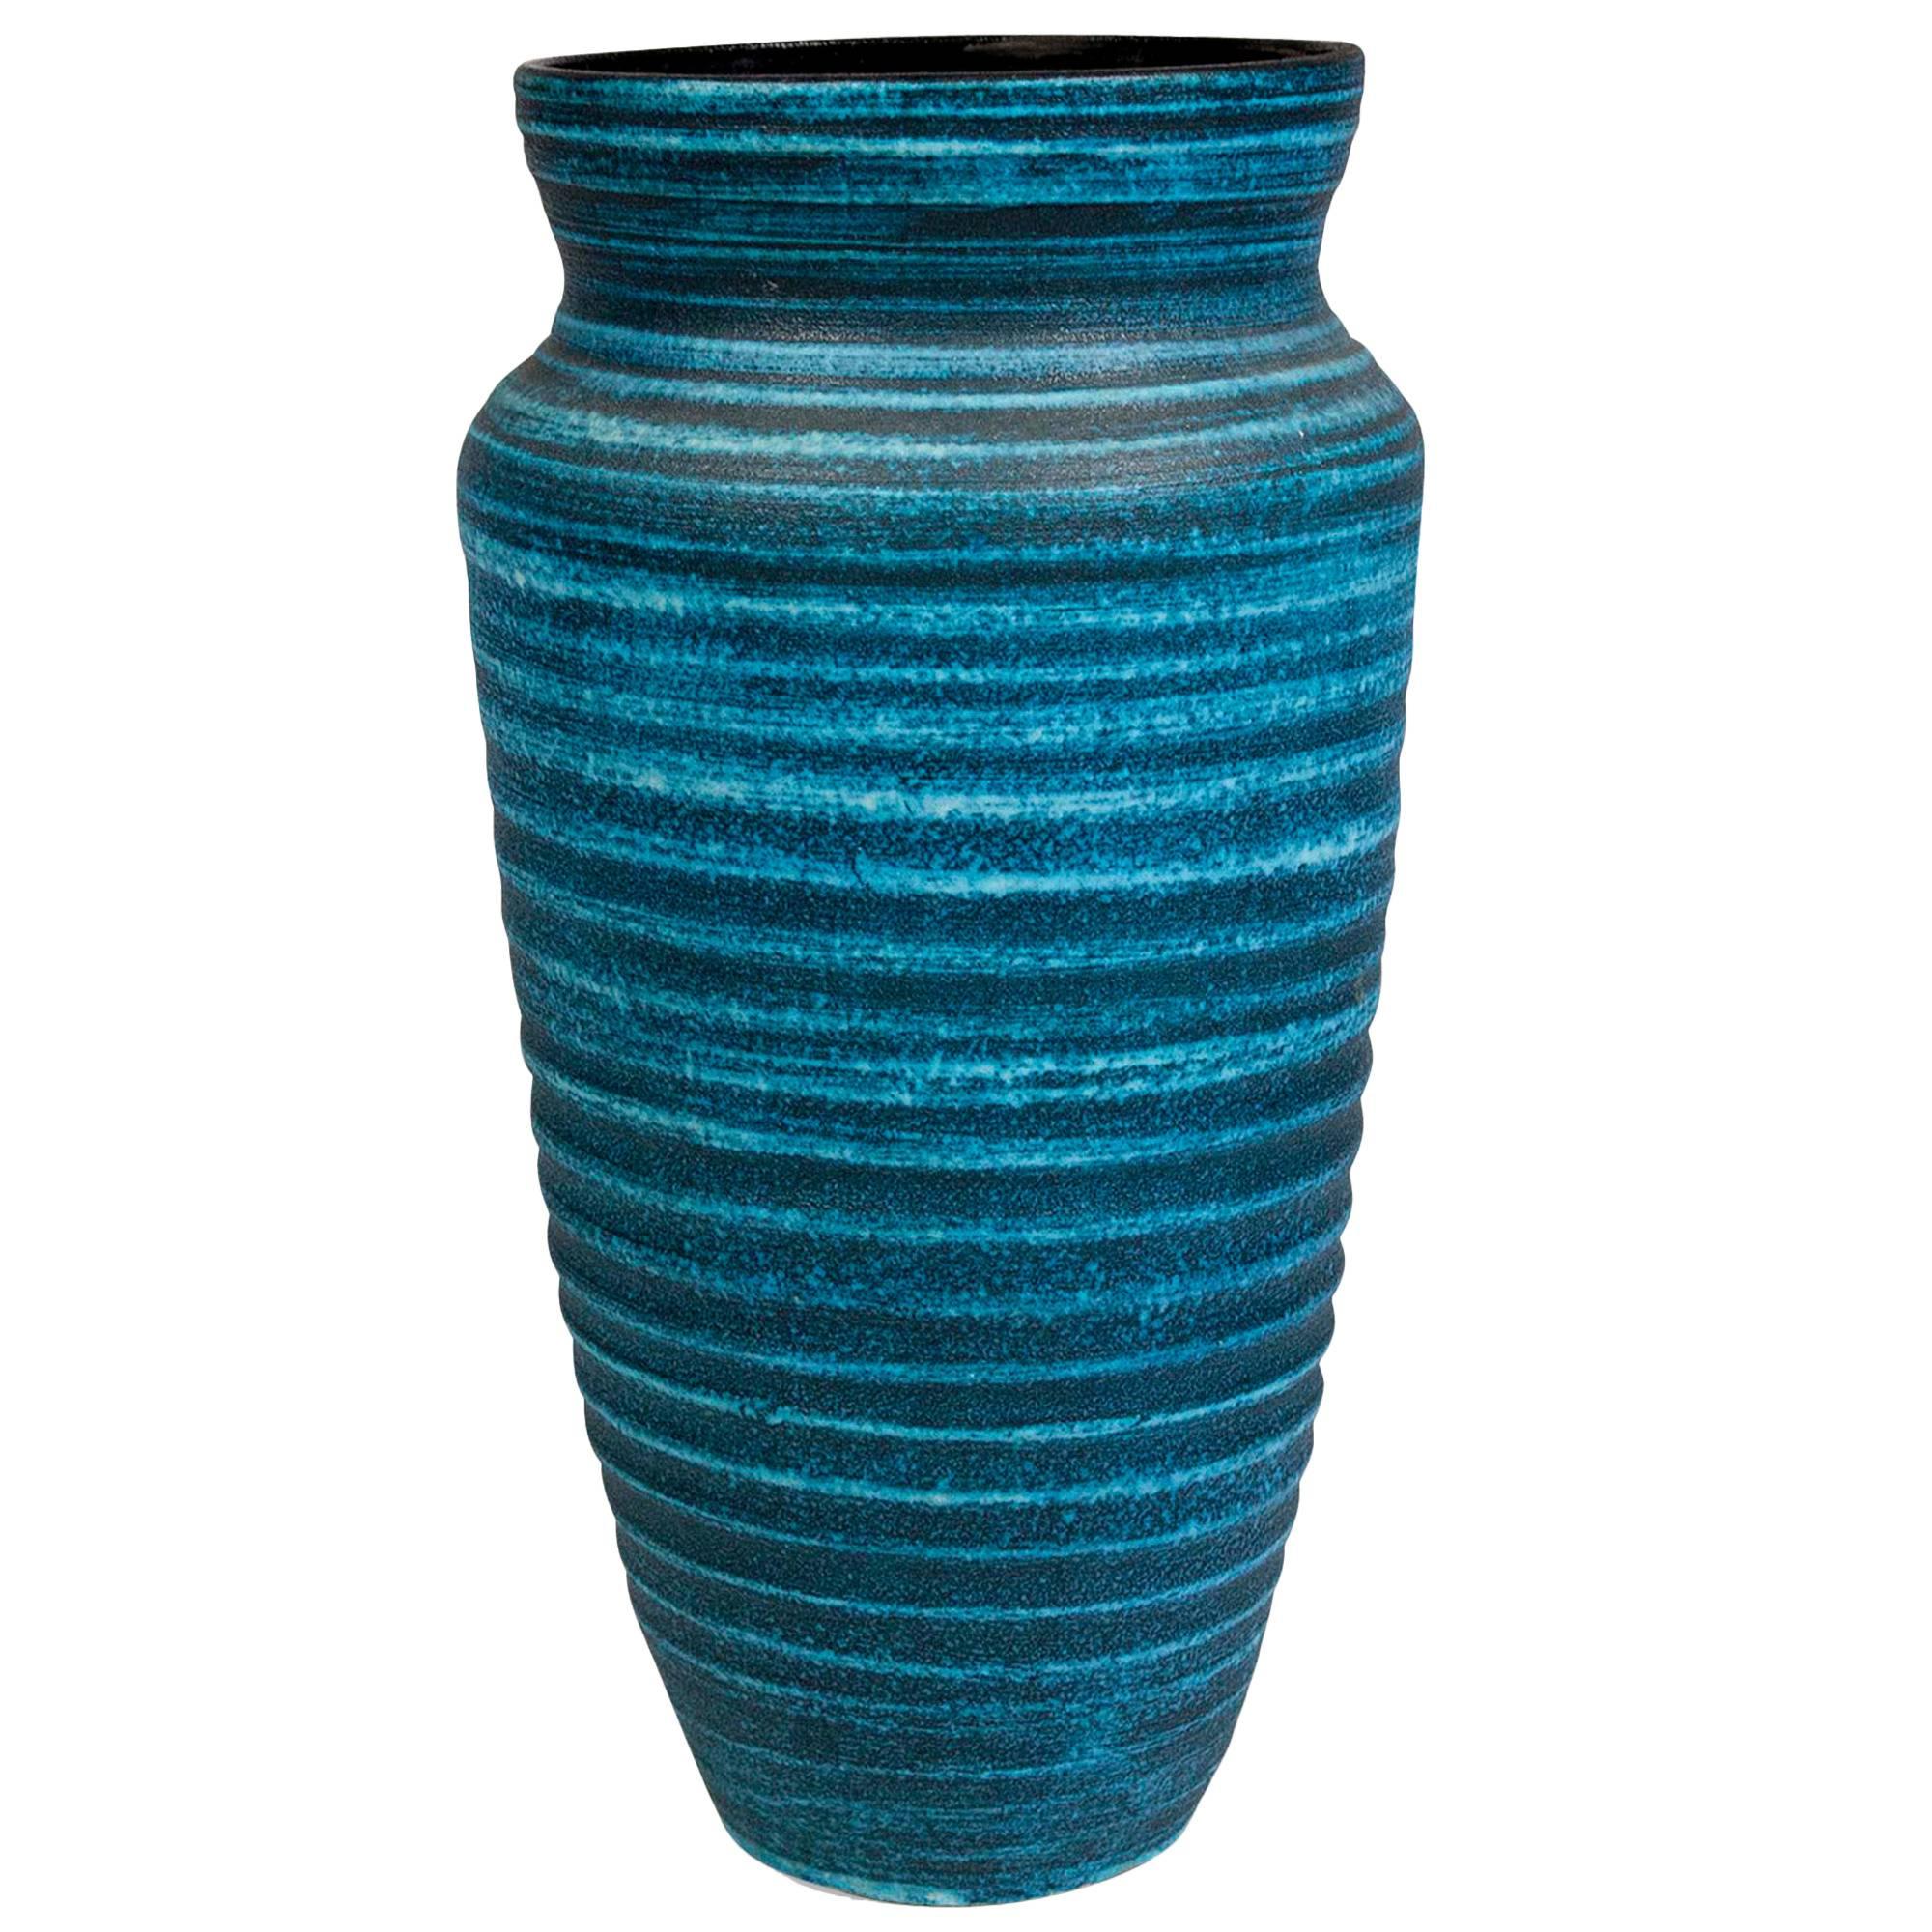 Blue Banded Ceramic Vase by Accolay